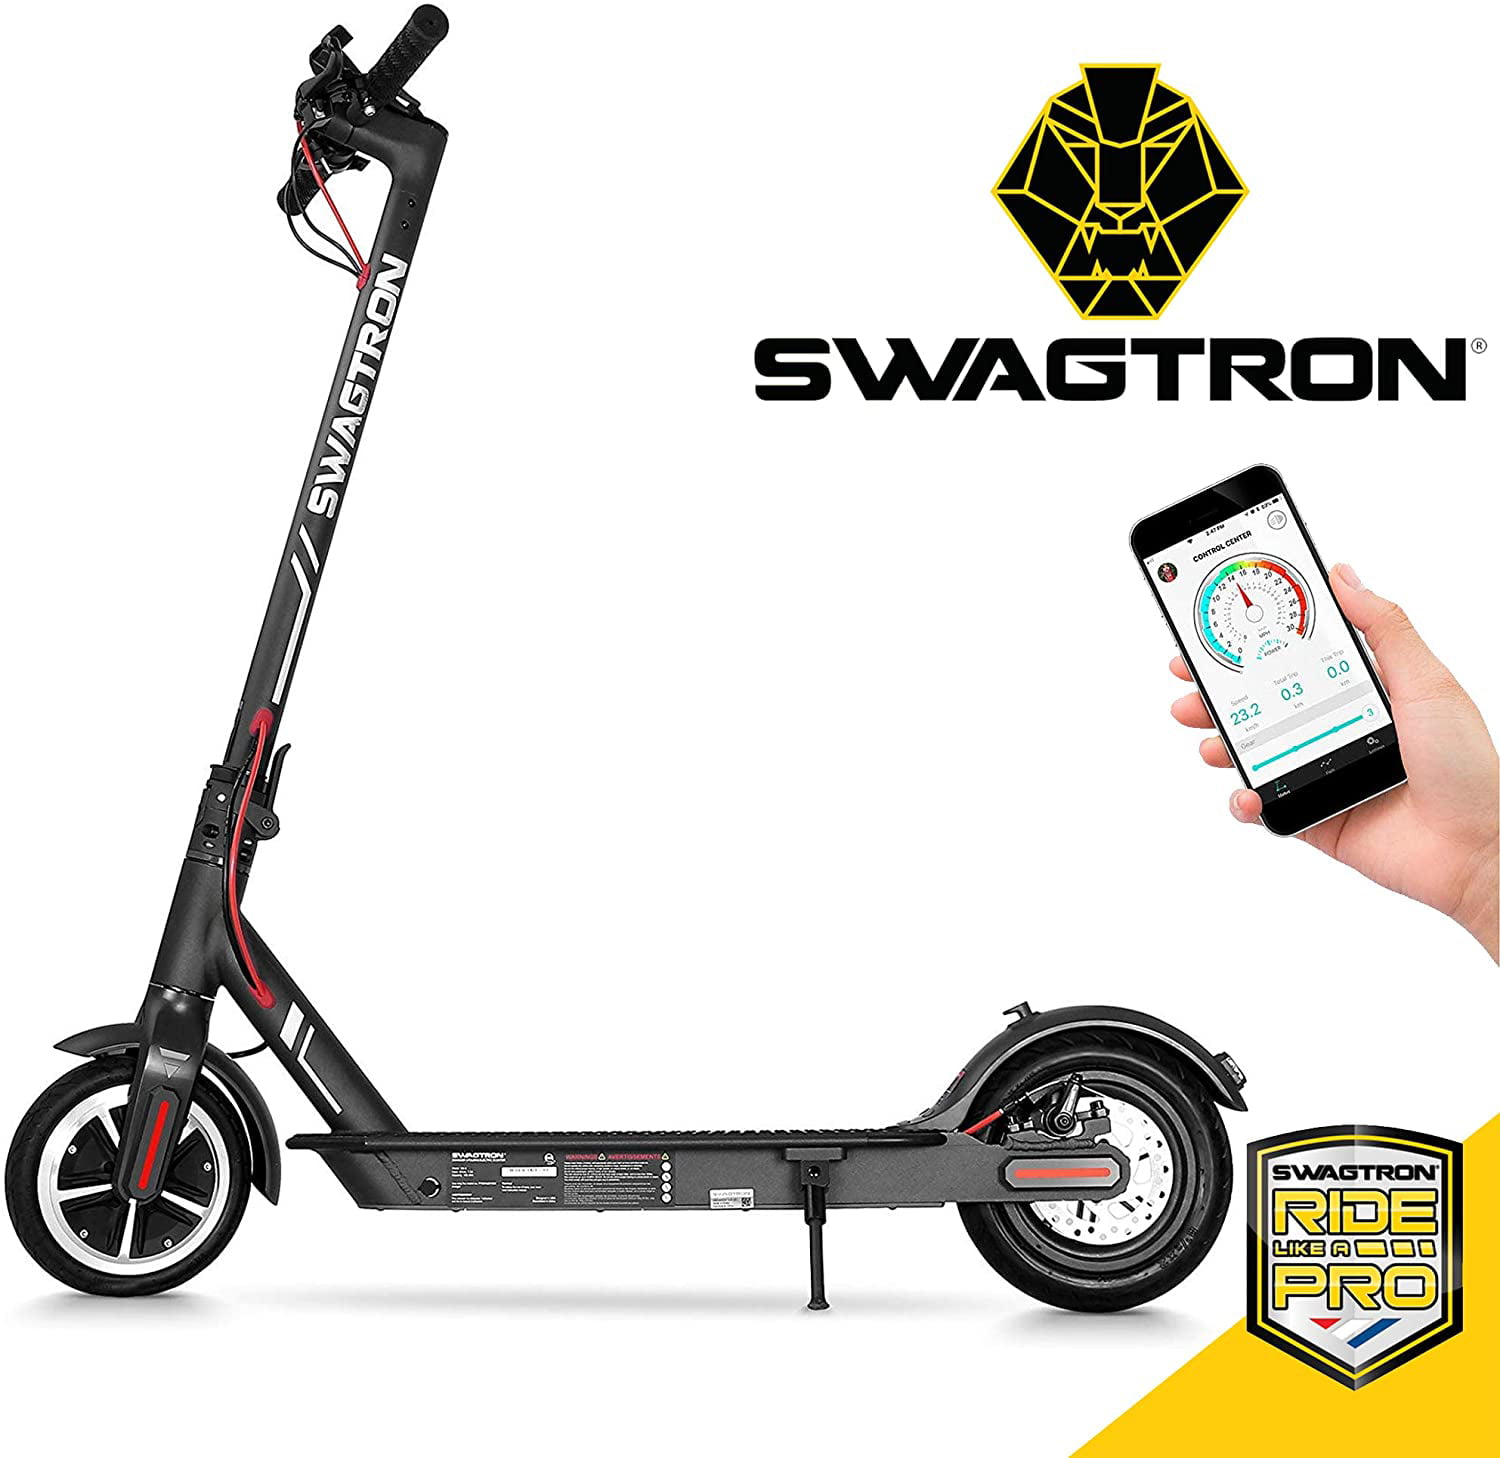 swagtron scooter